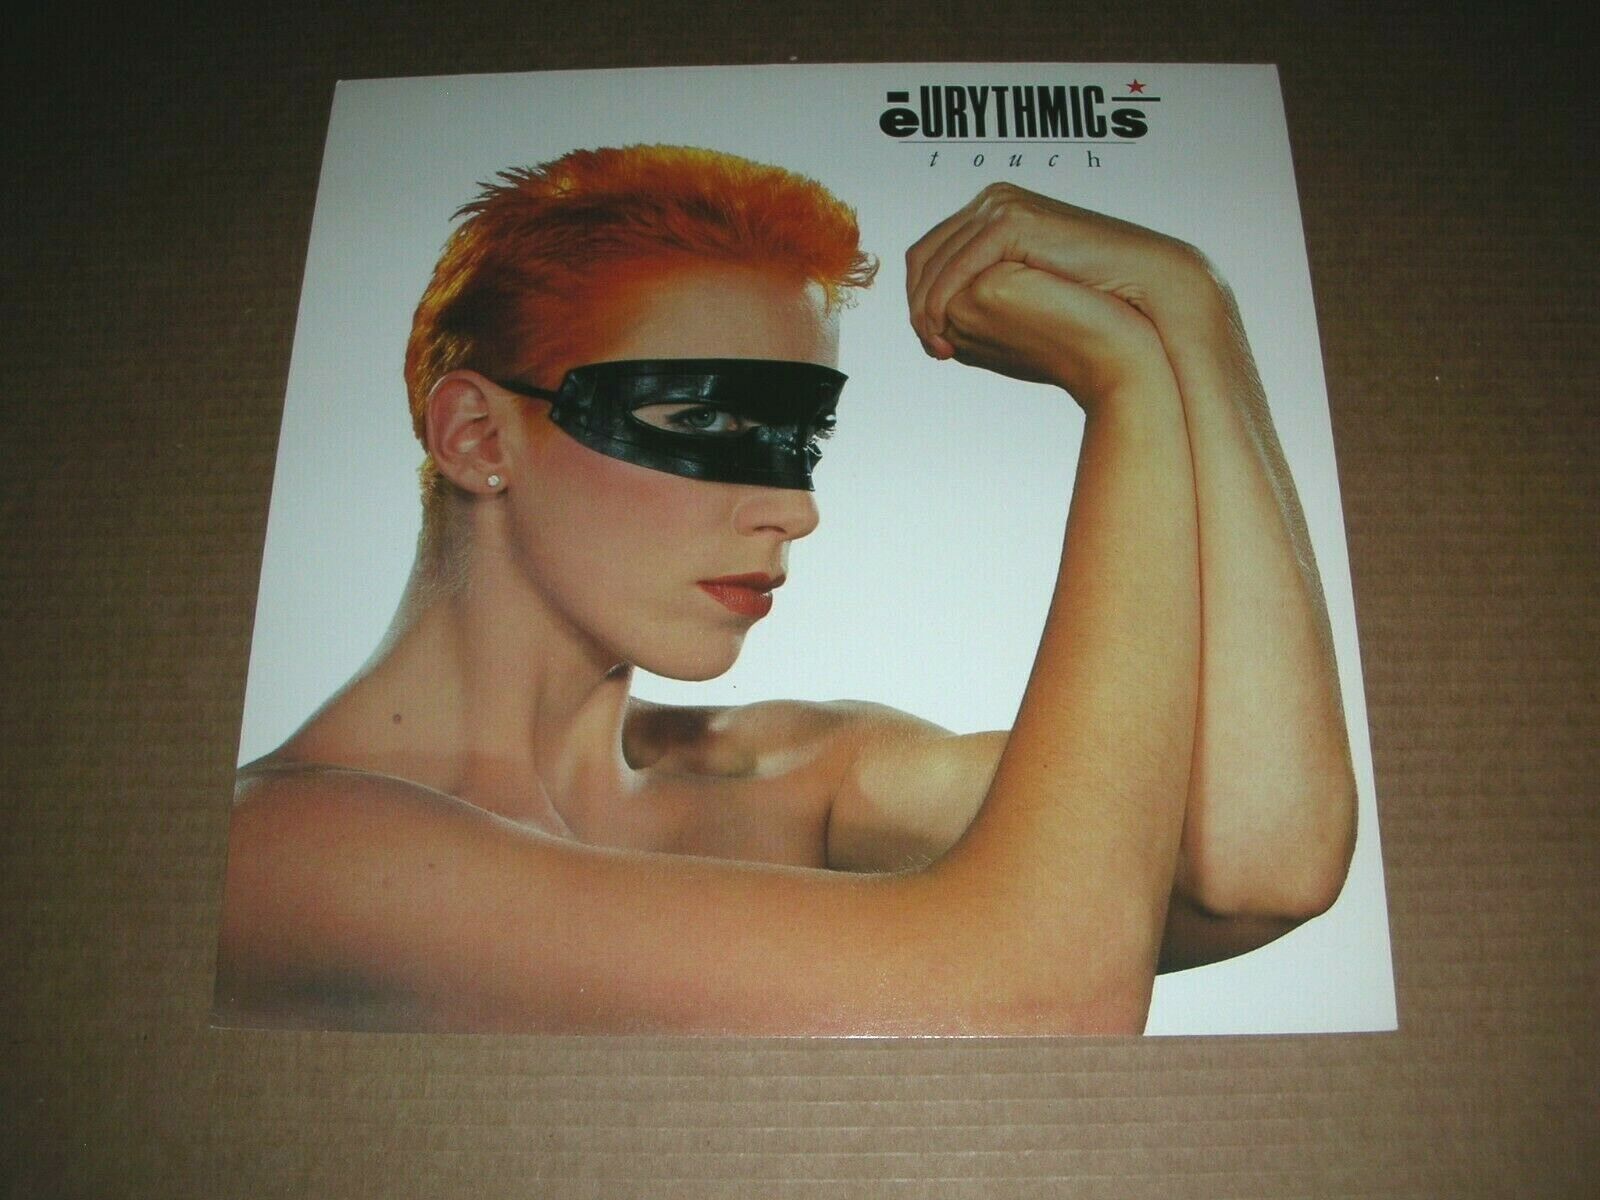 Eurythmics Touch Annie Lennox 1 Sided Vintage Promo 12x12 Poster Flat 1983 Mint-